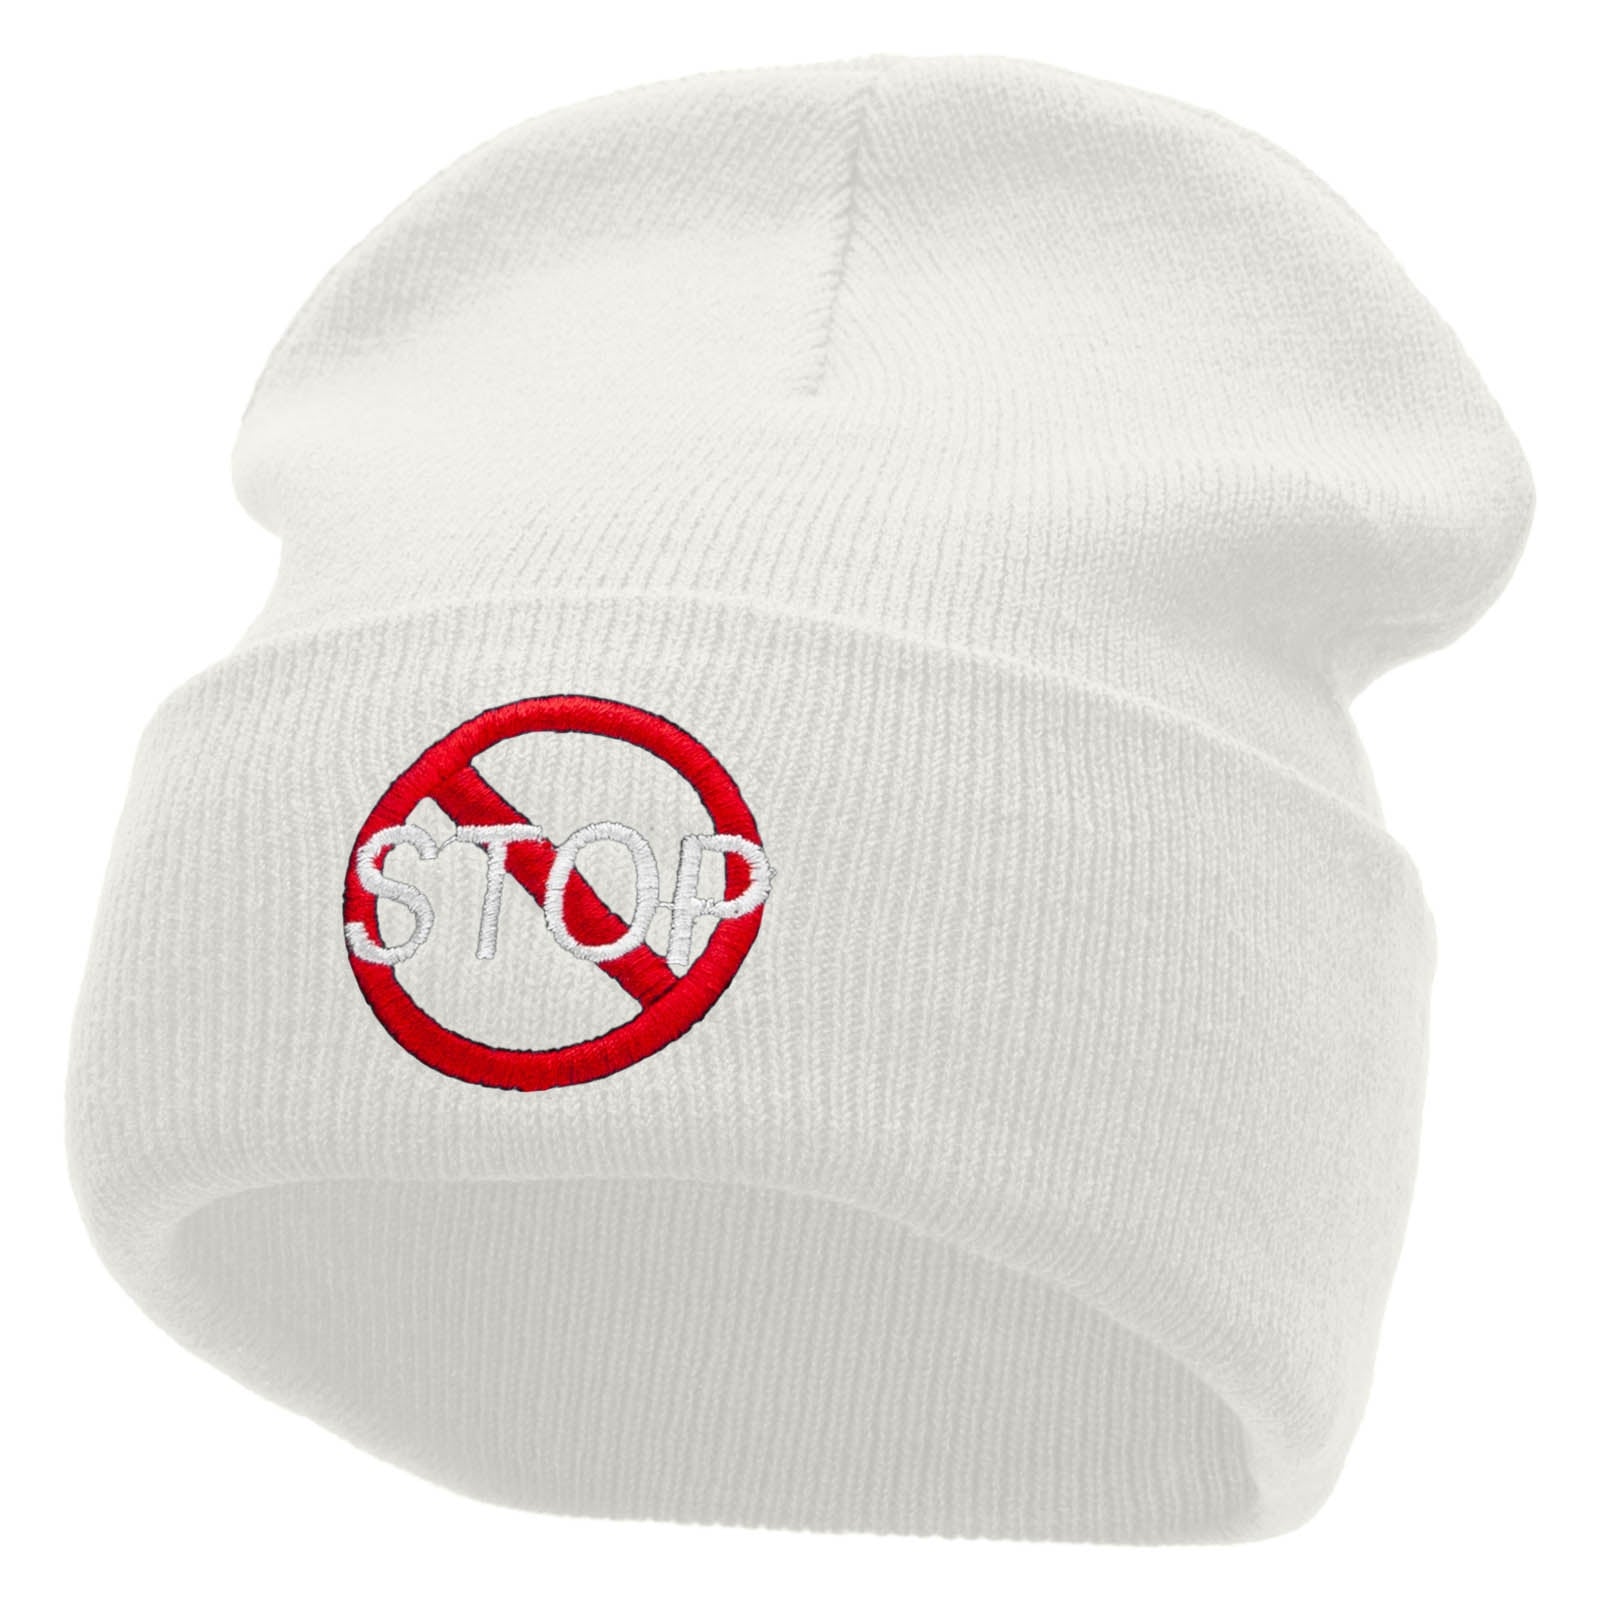 Stop Embroidered 12 Inch Long Knitted Beanie - White OSFM